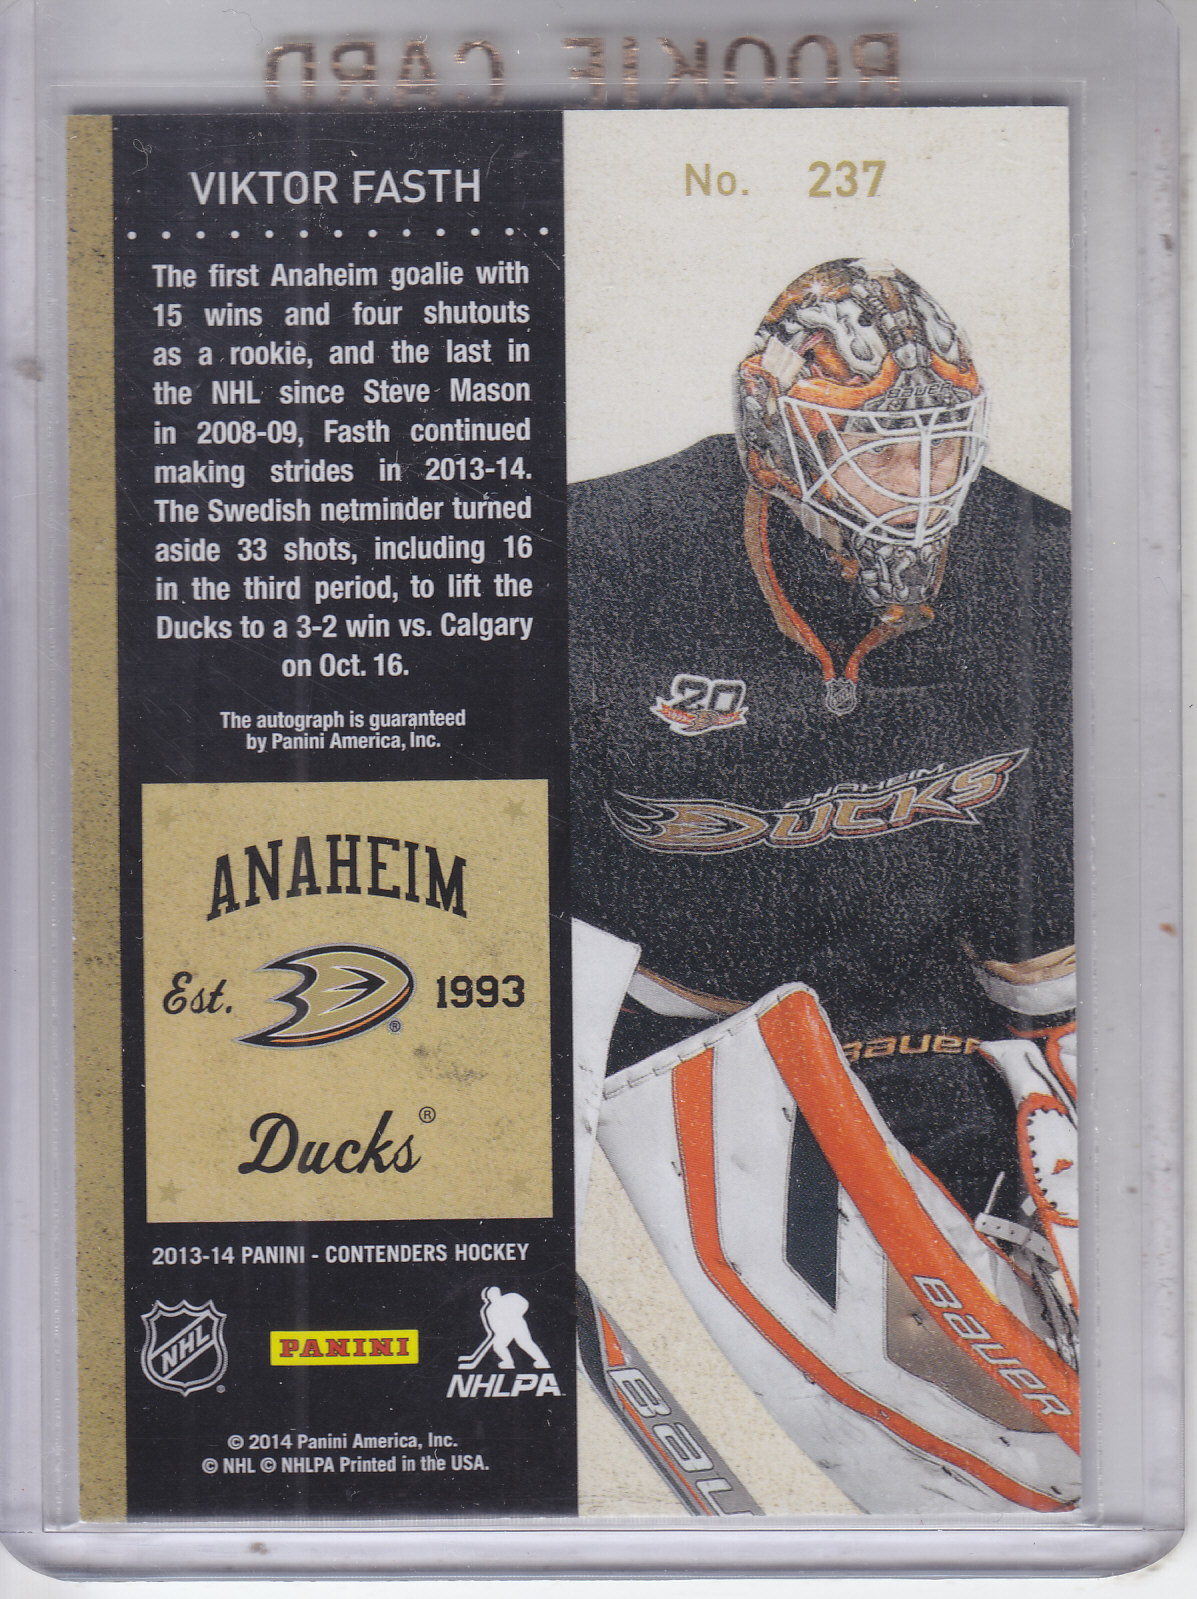 2013-14 Panini Contenders #237A Viktor Fasth AU SP2 RC back image